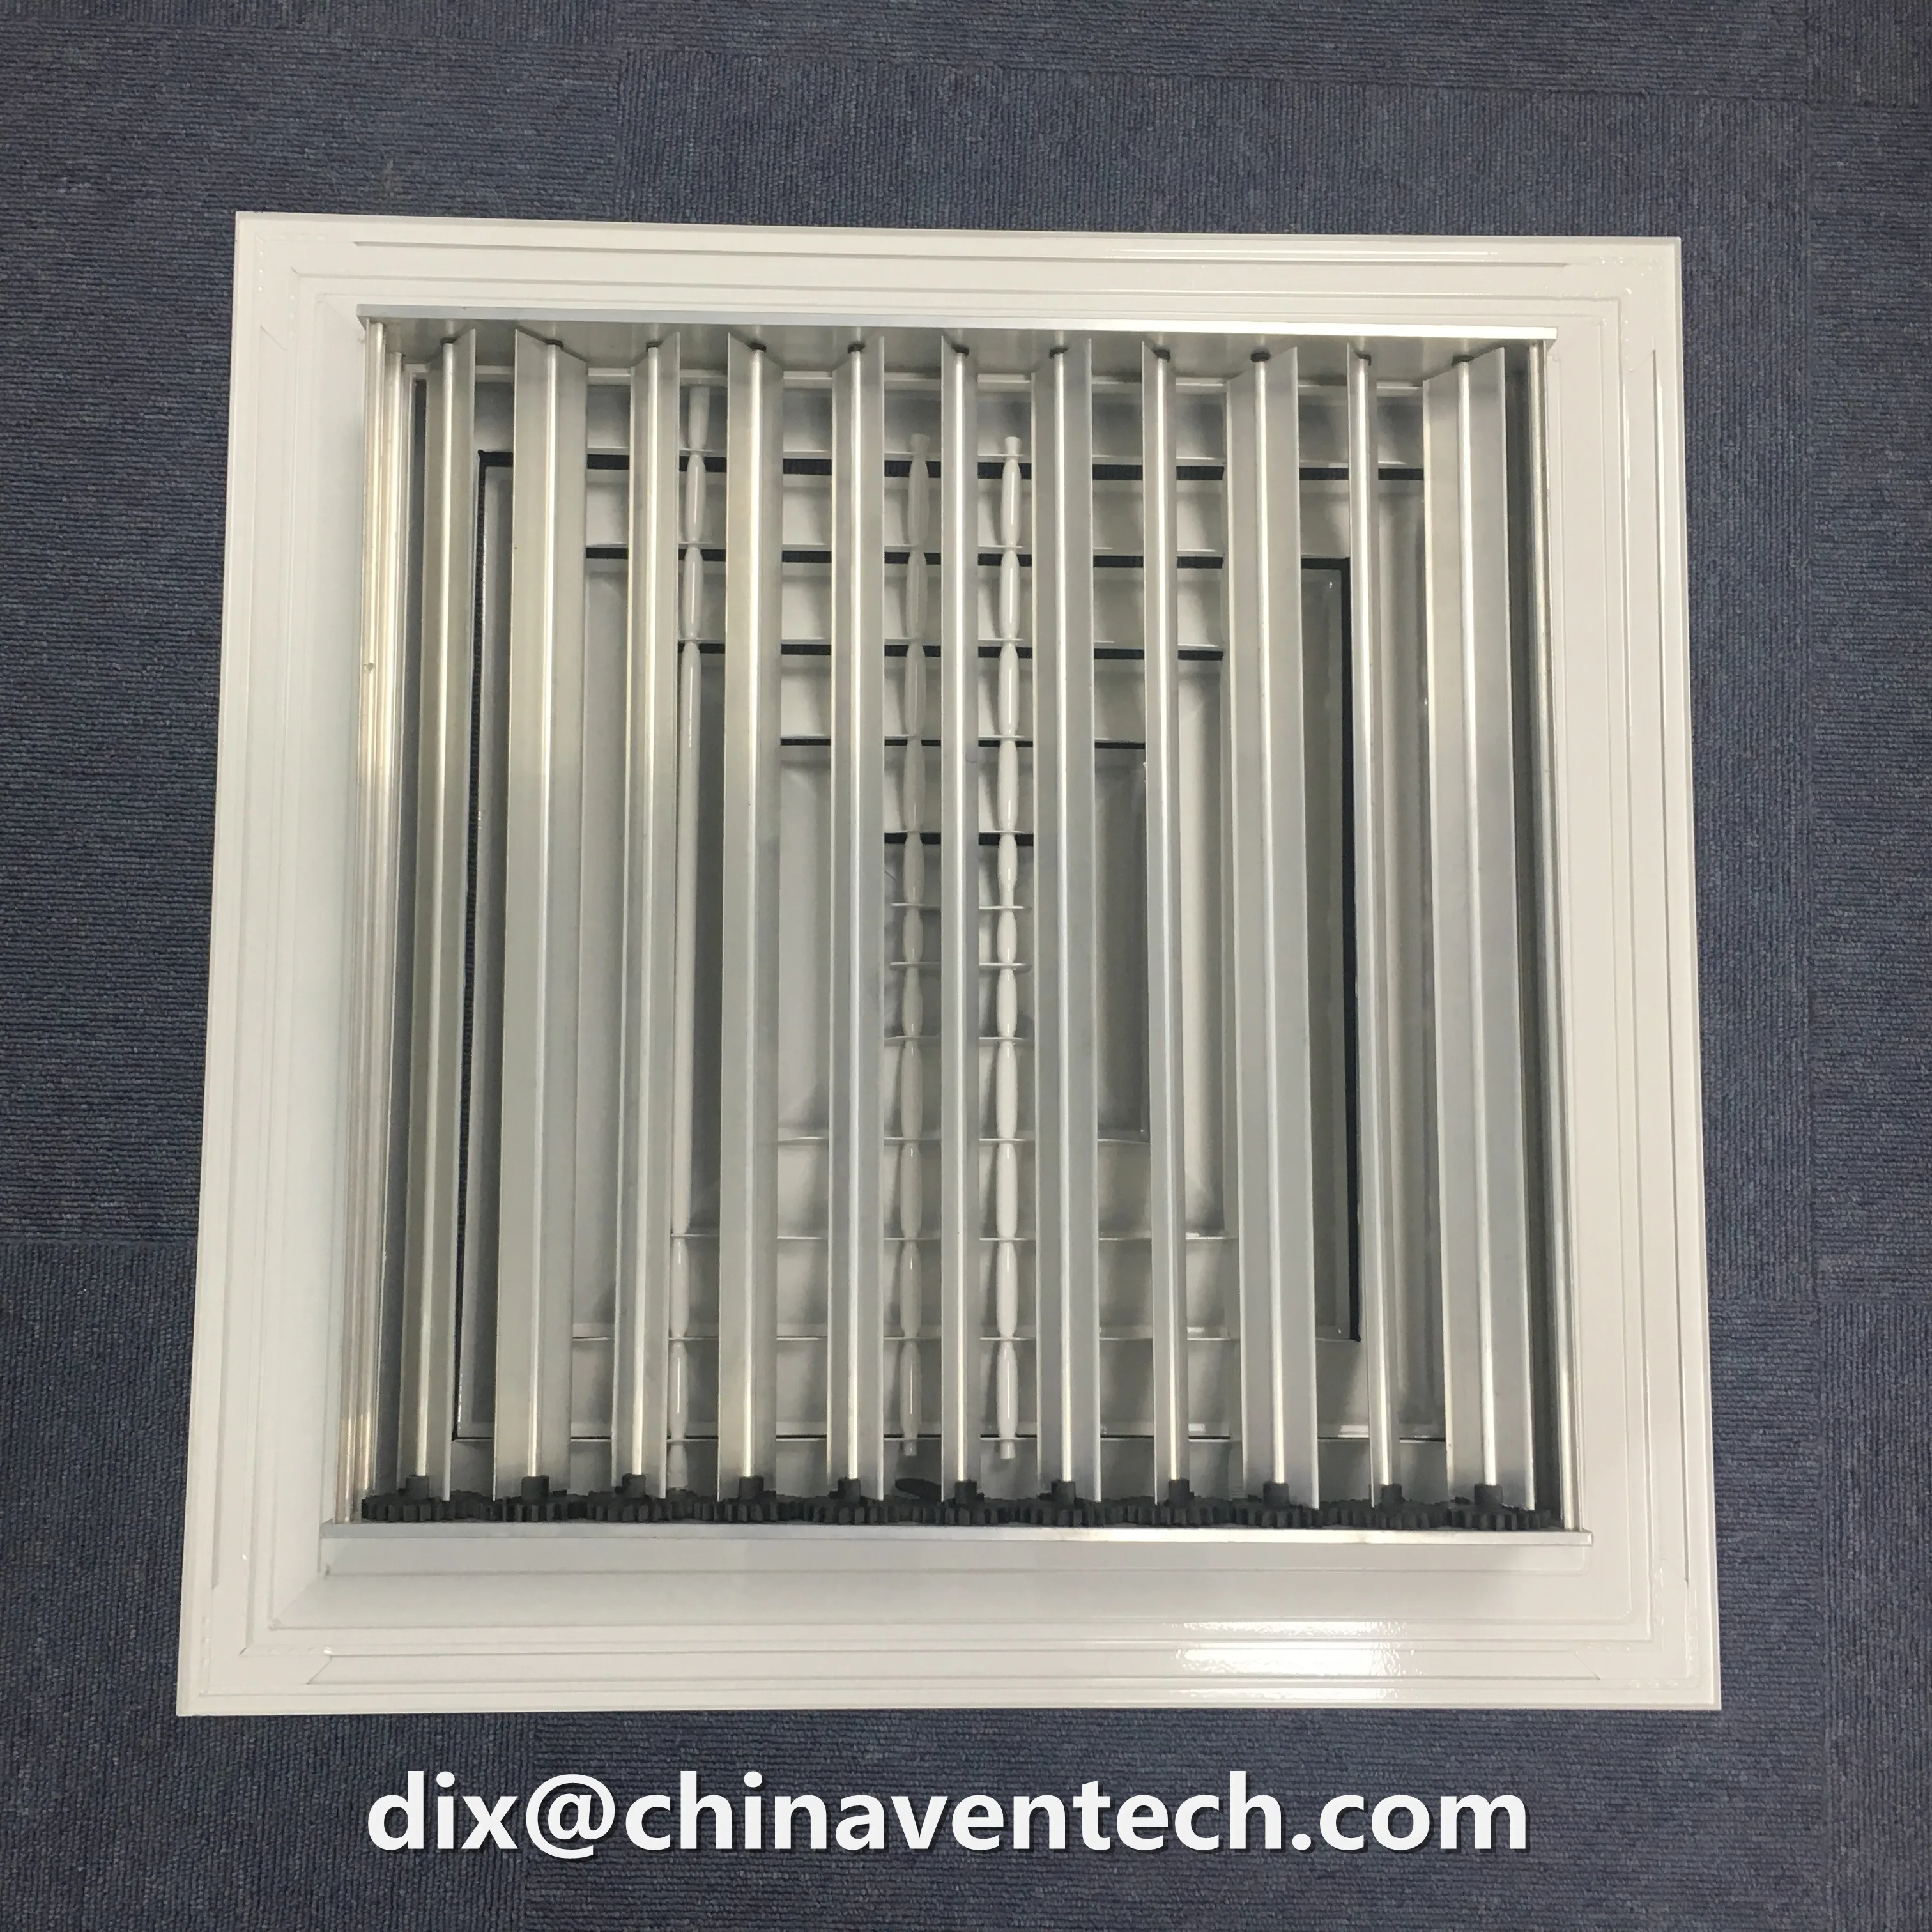 Hvac air distribution products architectural grilles  4 way square ceiling diffusers